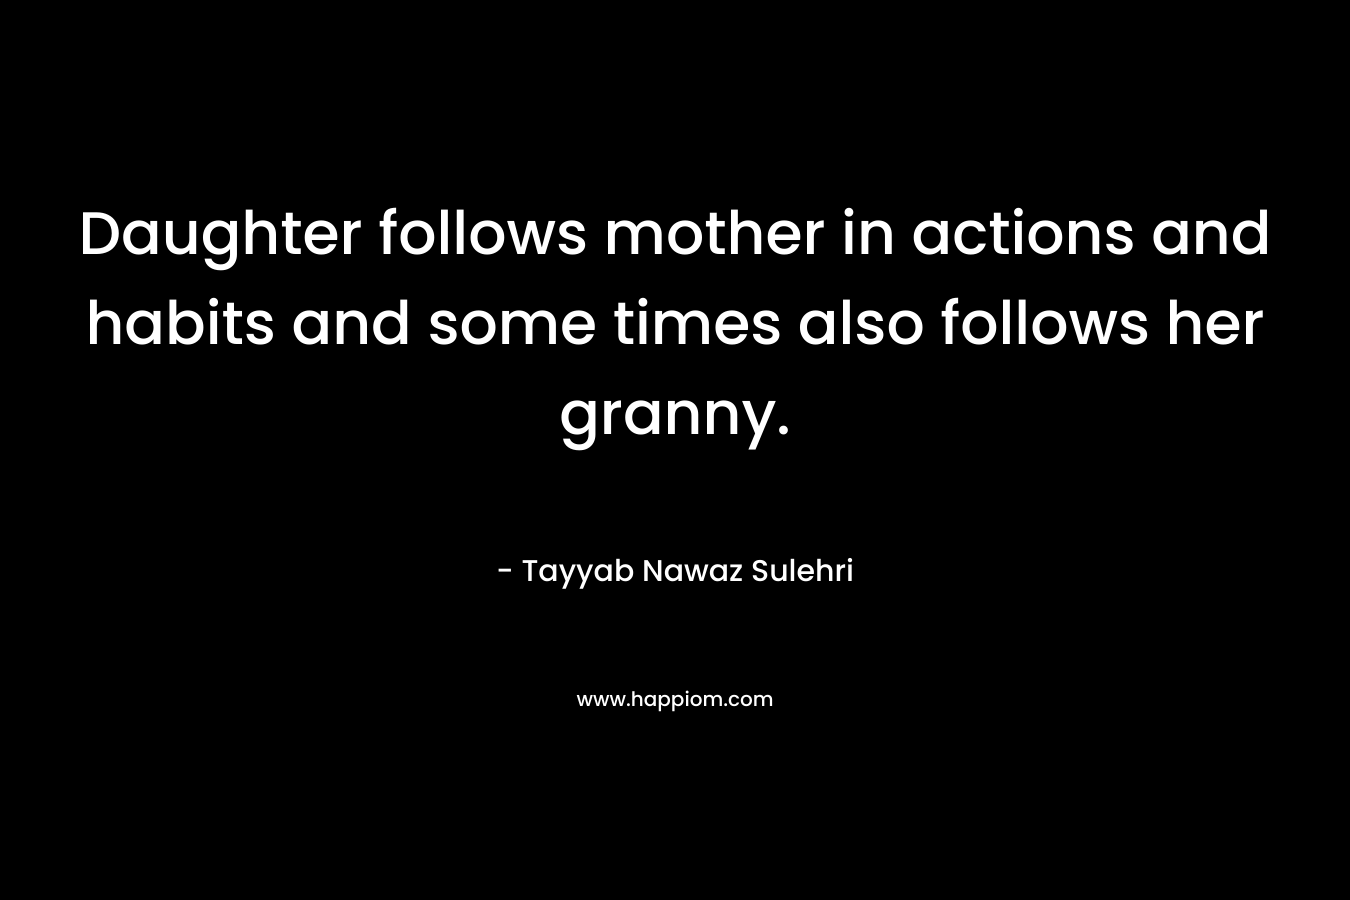 Daughter follows mother in actions and habits and some times also follows her granny. – Tayyab Nawaz Sulehri